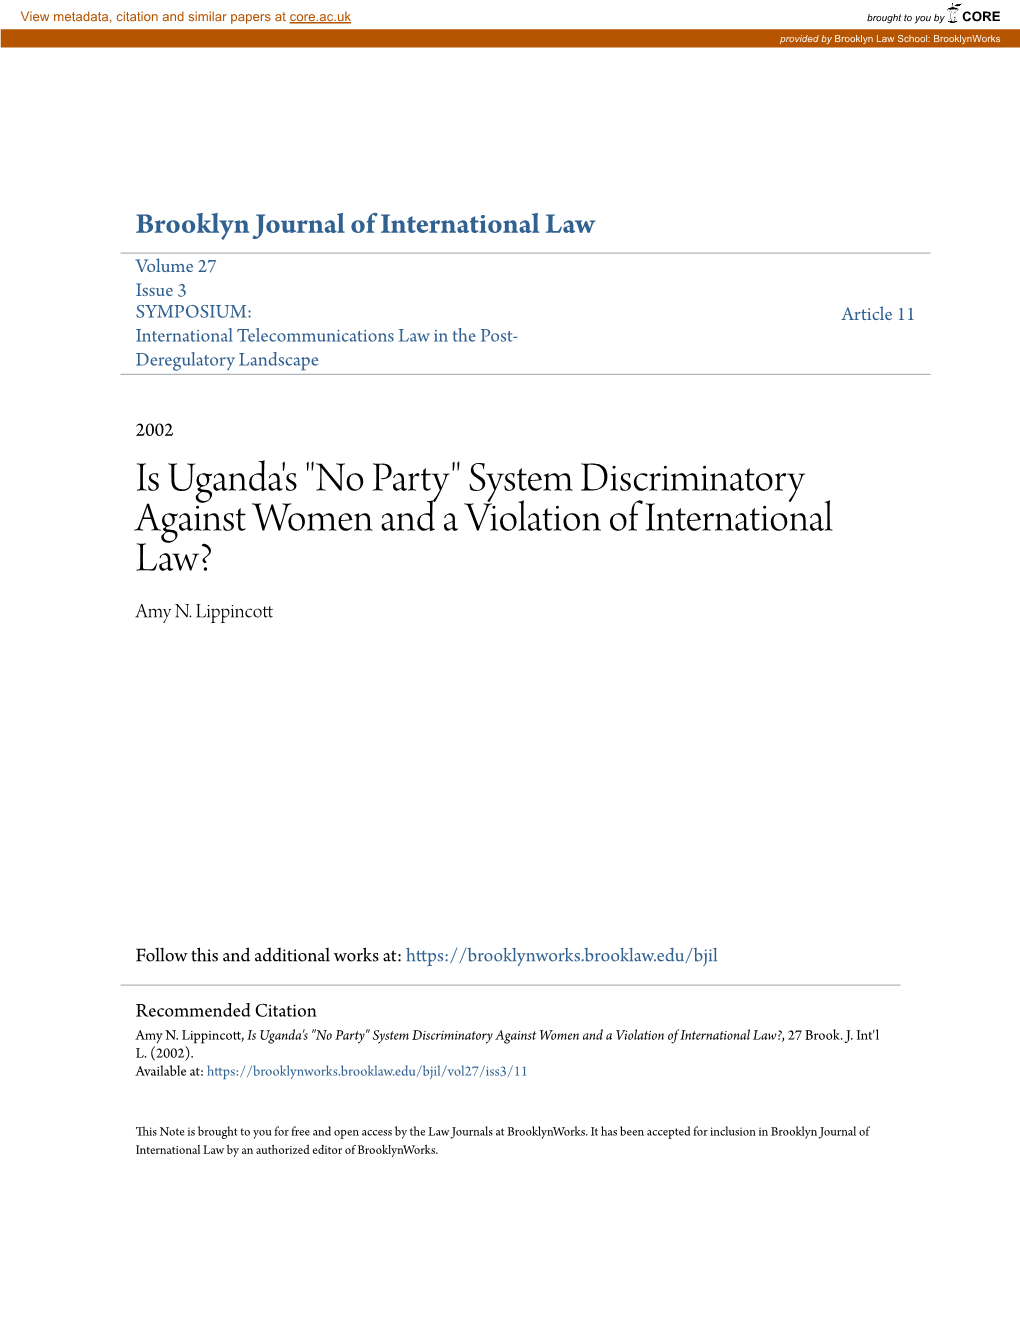 Is Uganda's "No Party" System Discriminatory Against Women and a Violation of International Law? Amy N